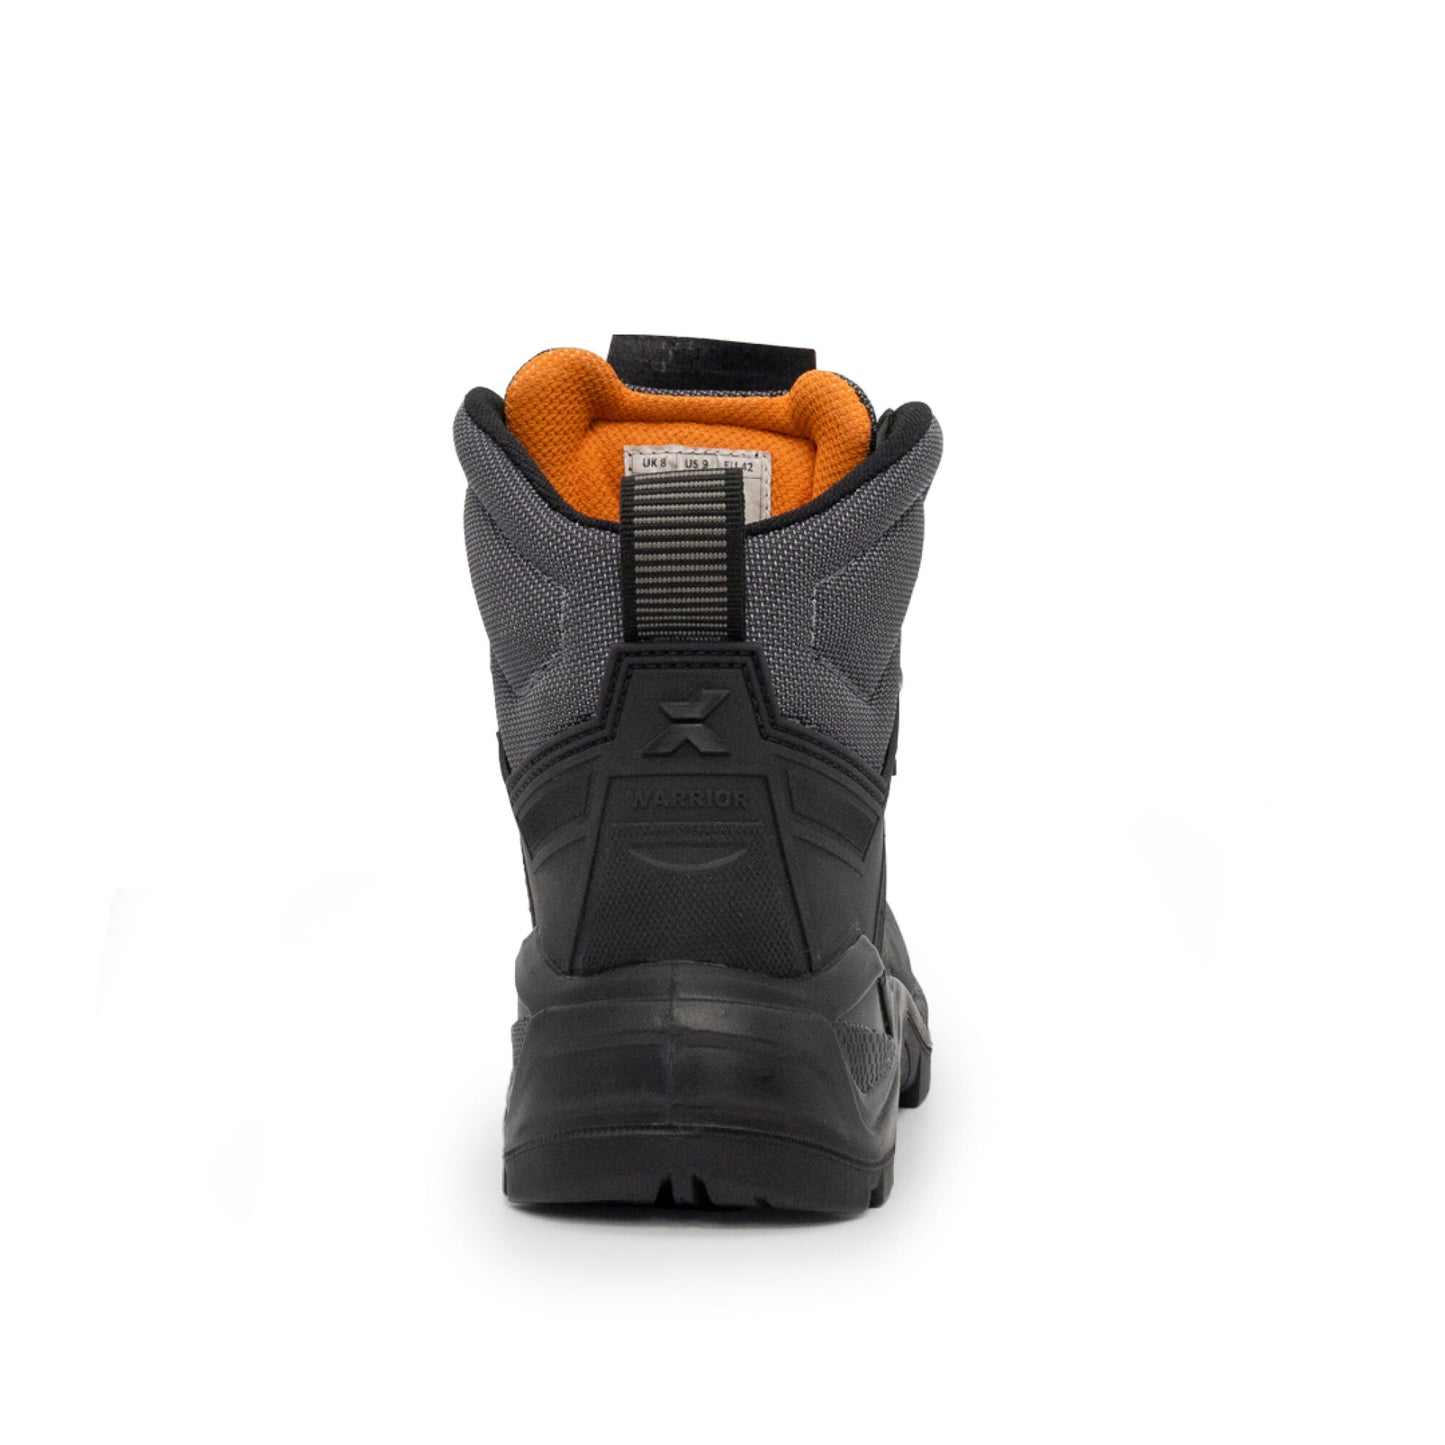 Xpert Warrior S3 Safety Boot